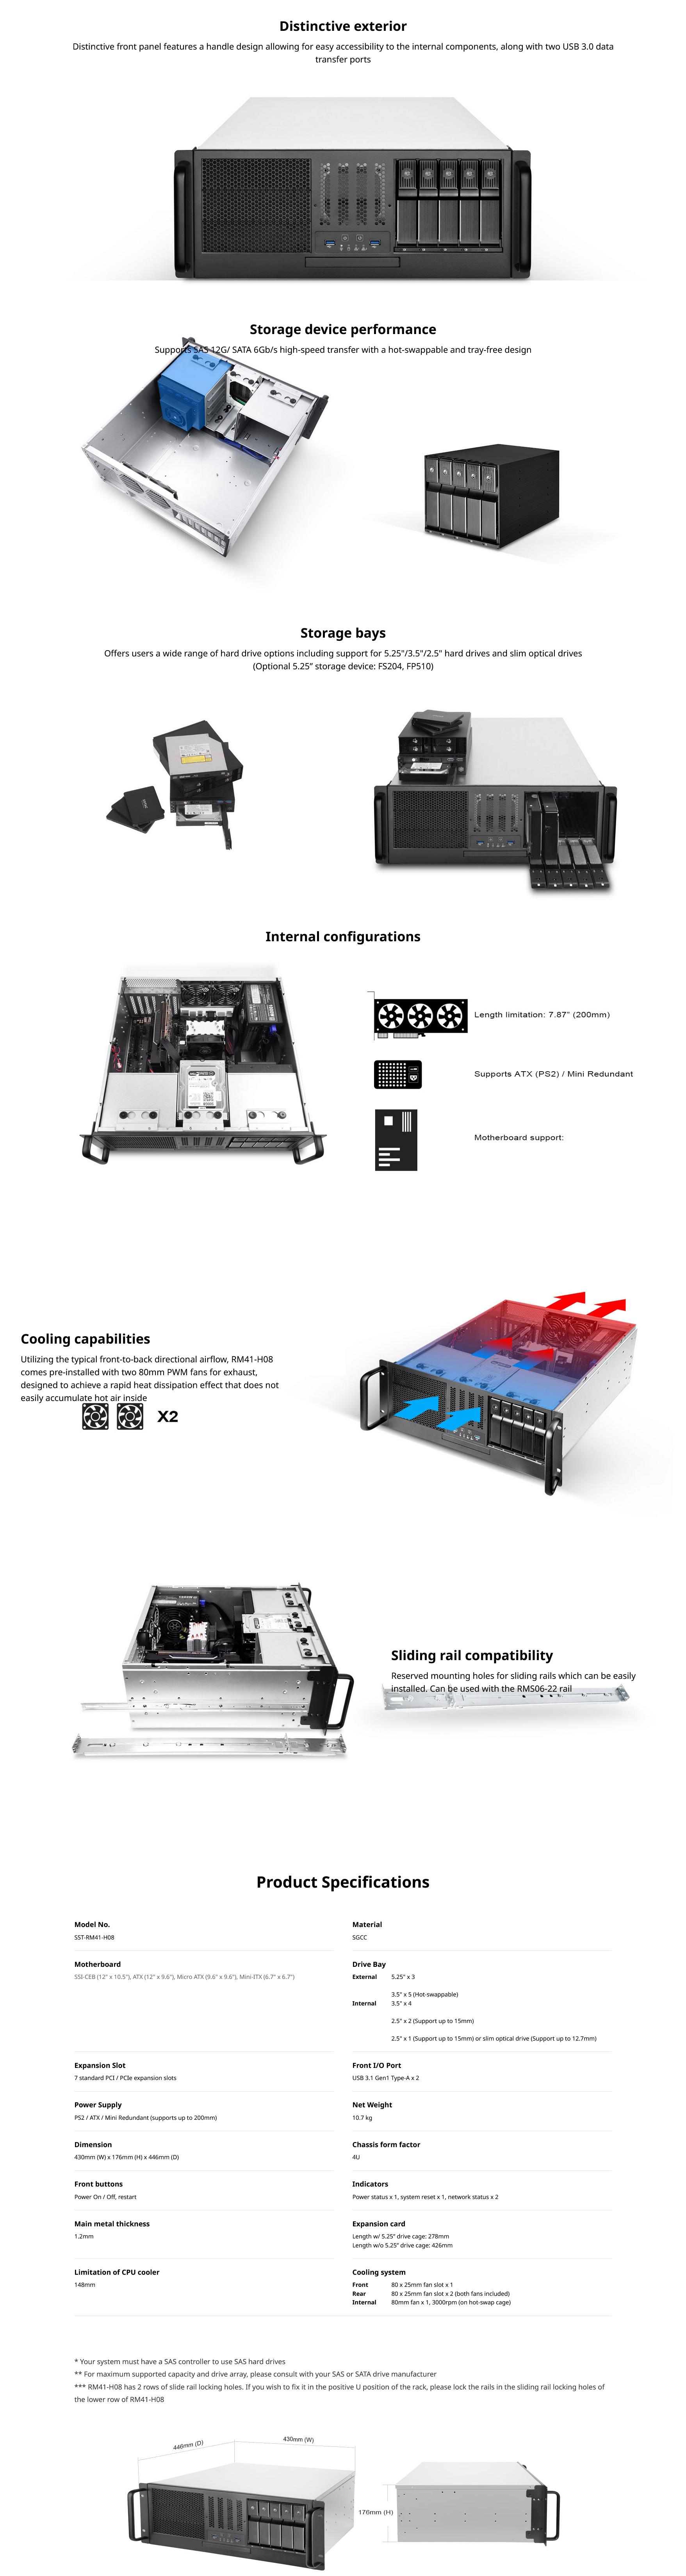 A large marketing image providing additional information about the product SilverStone RM41-H08 4U Rackmount Case - Black - Additional alt info not provided